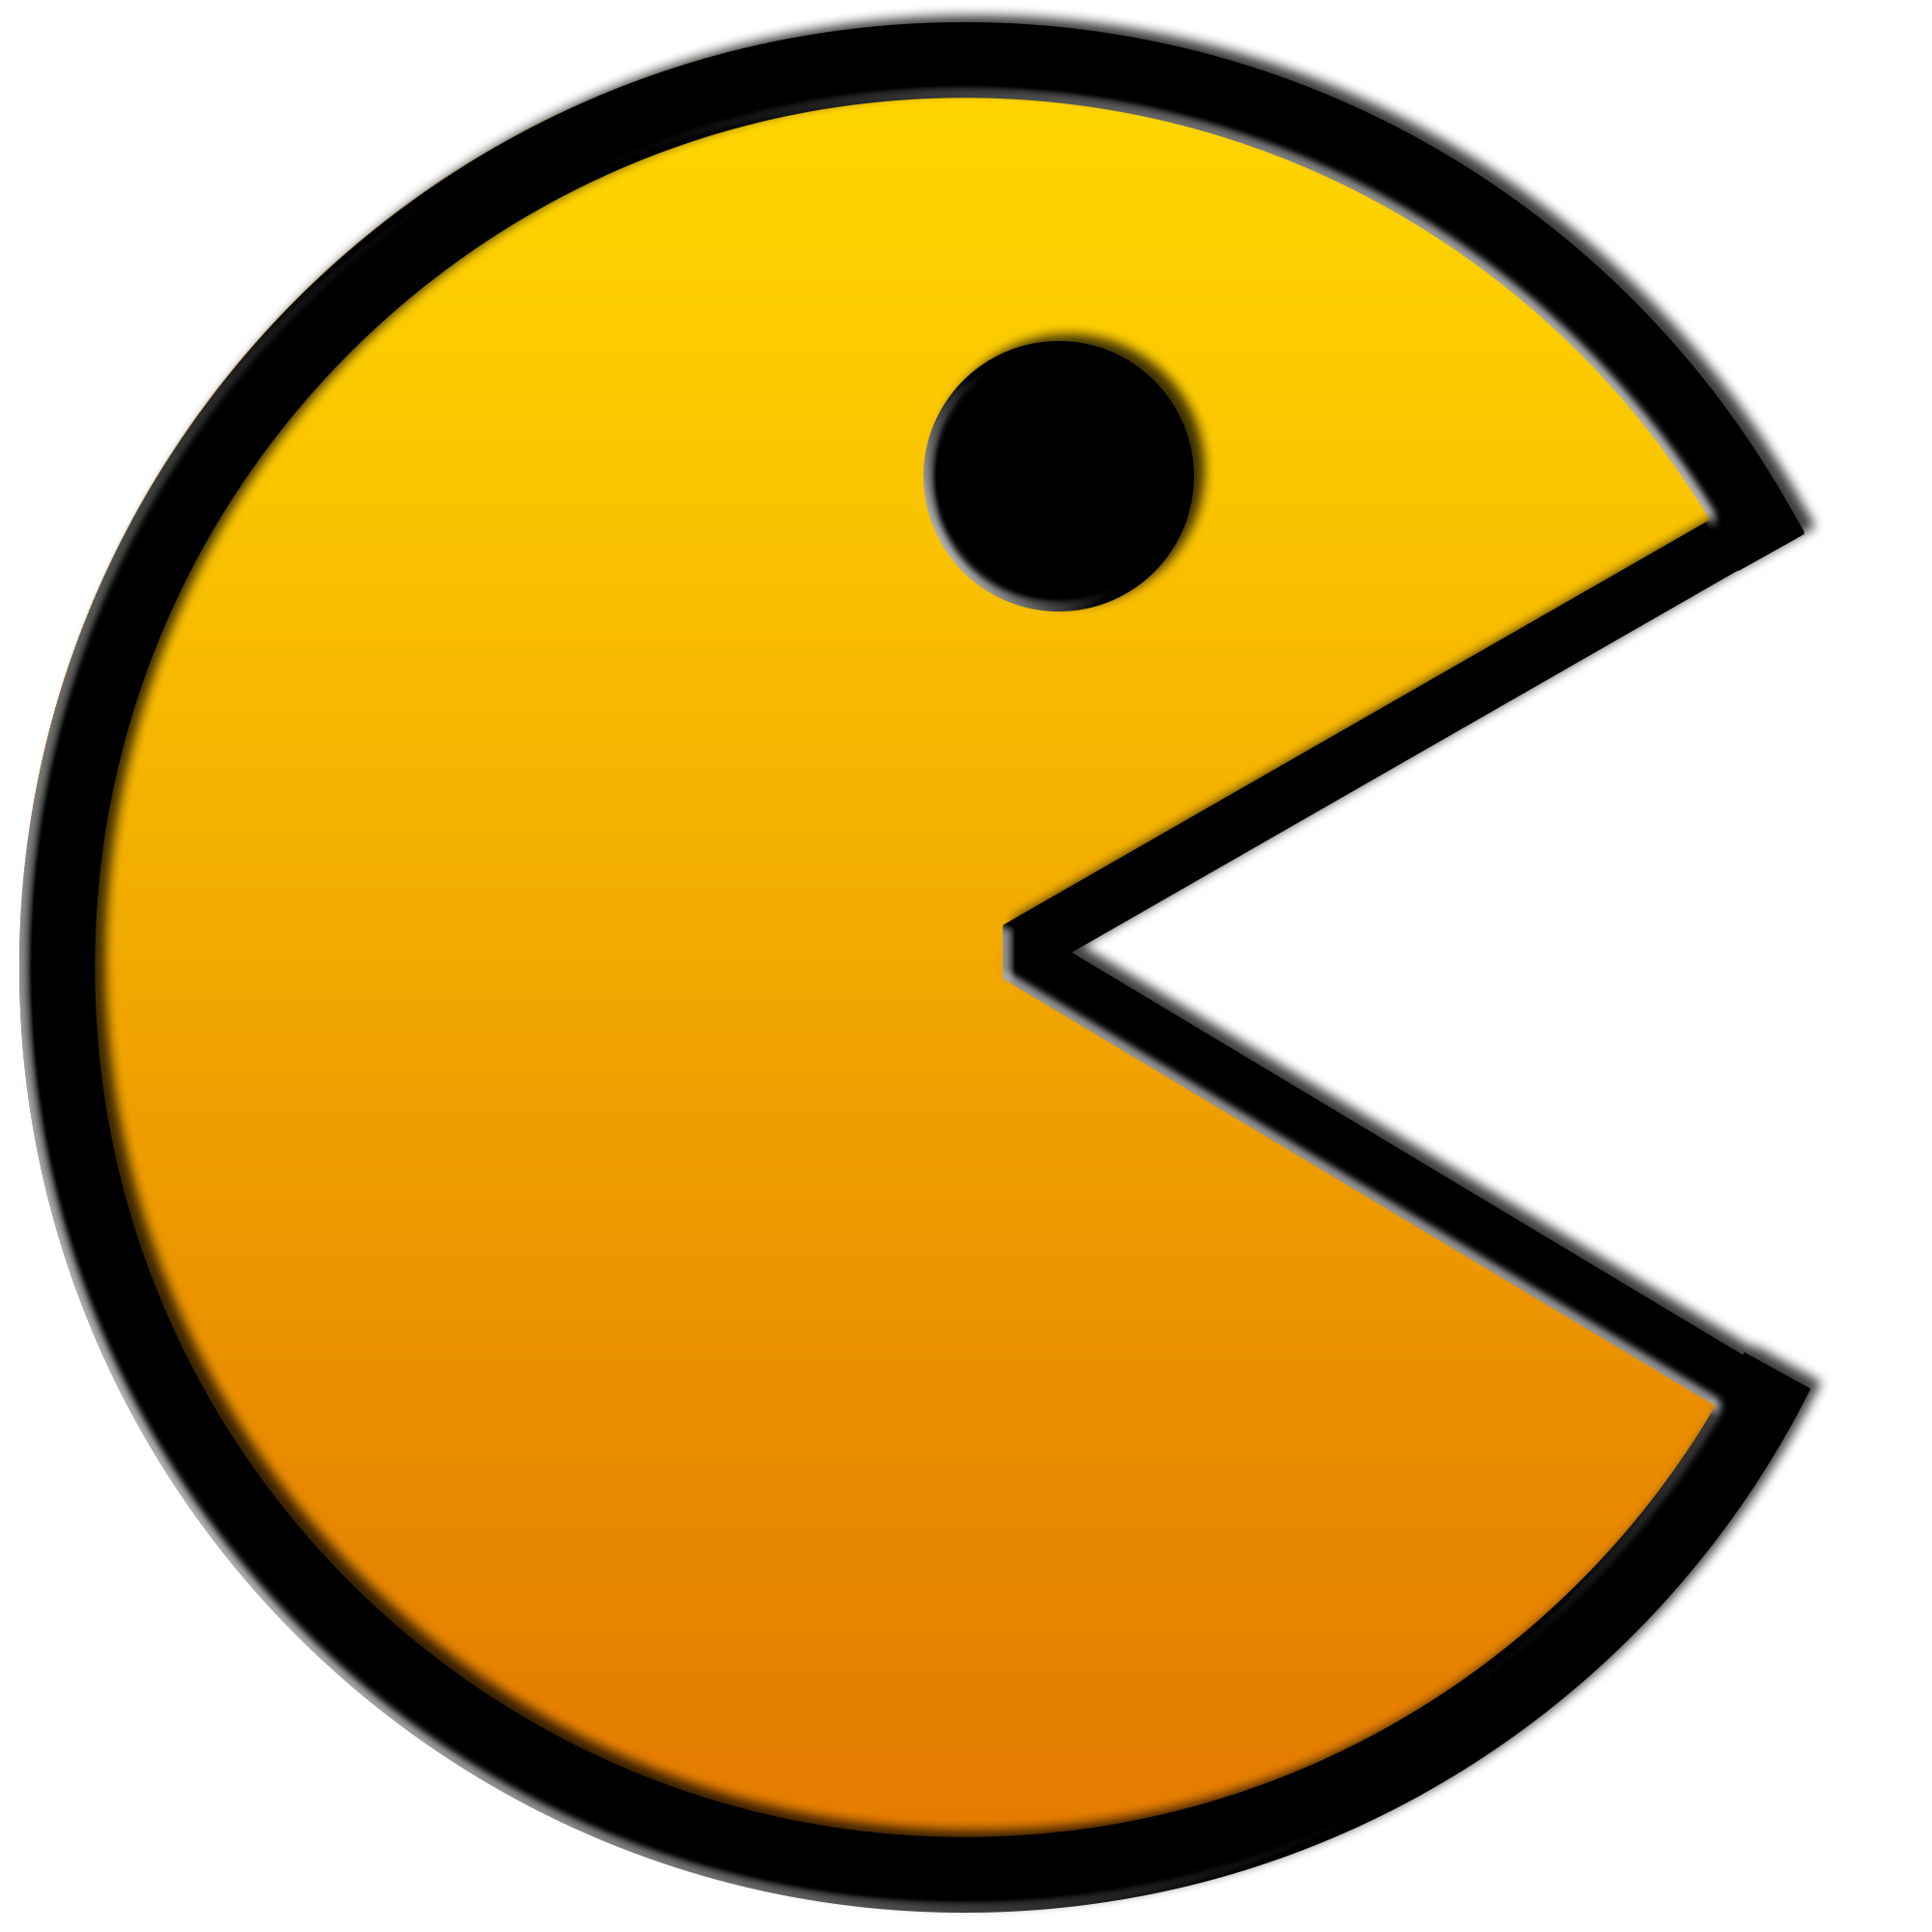 1000+ images about Pacman on Pinterest | Pac man costume, Gaming